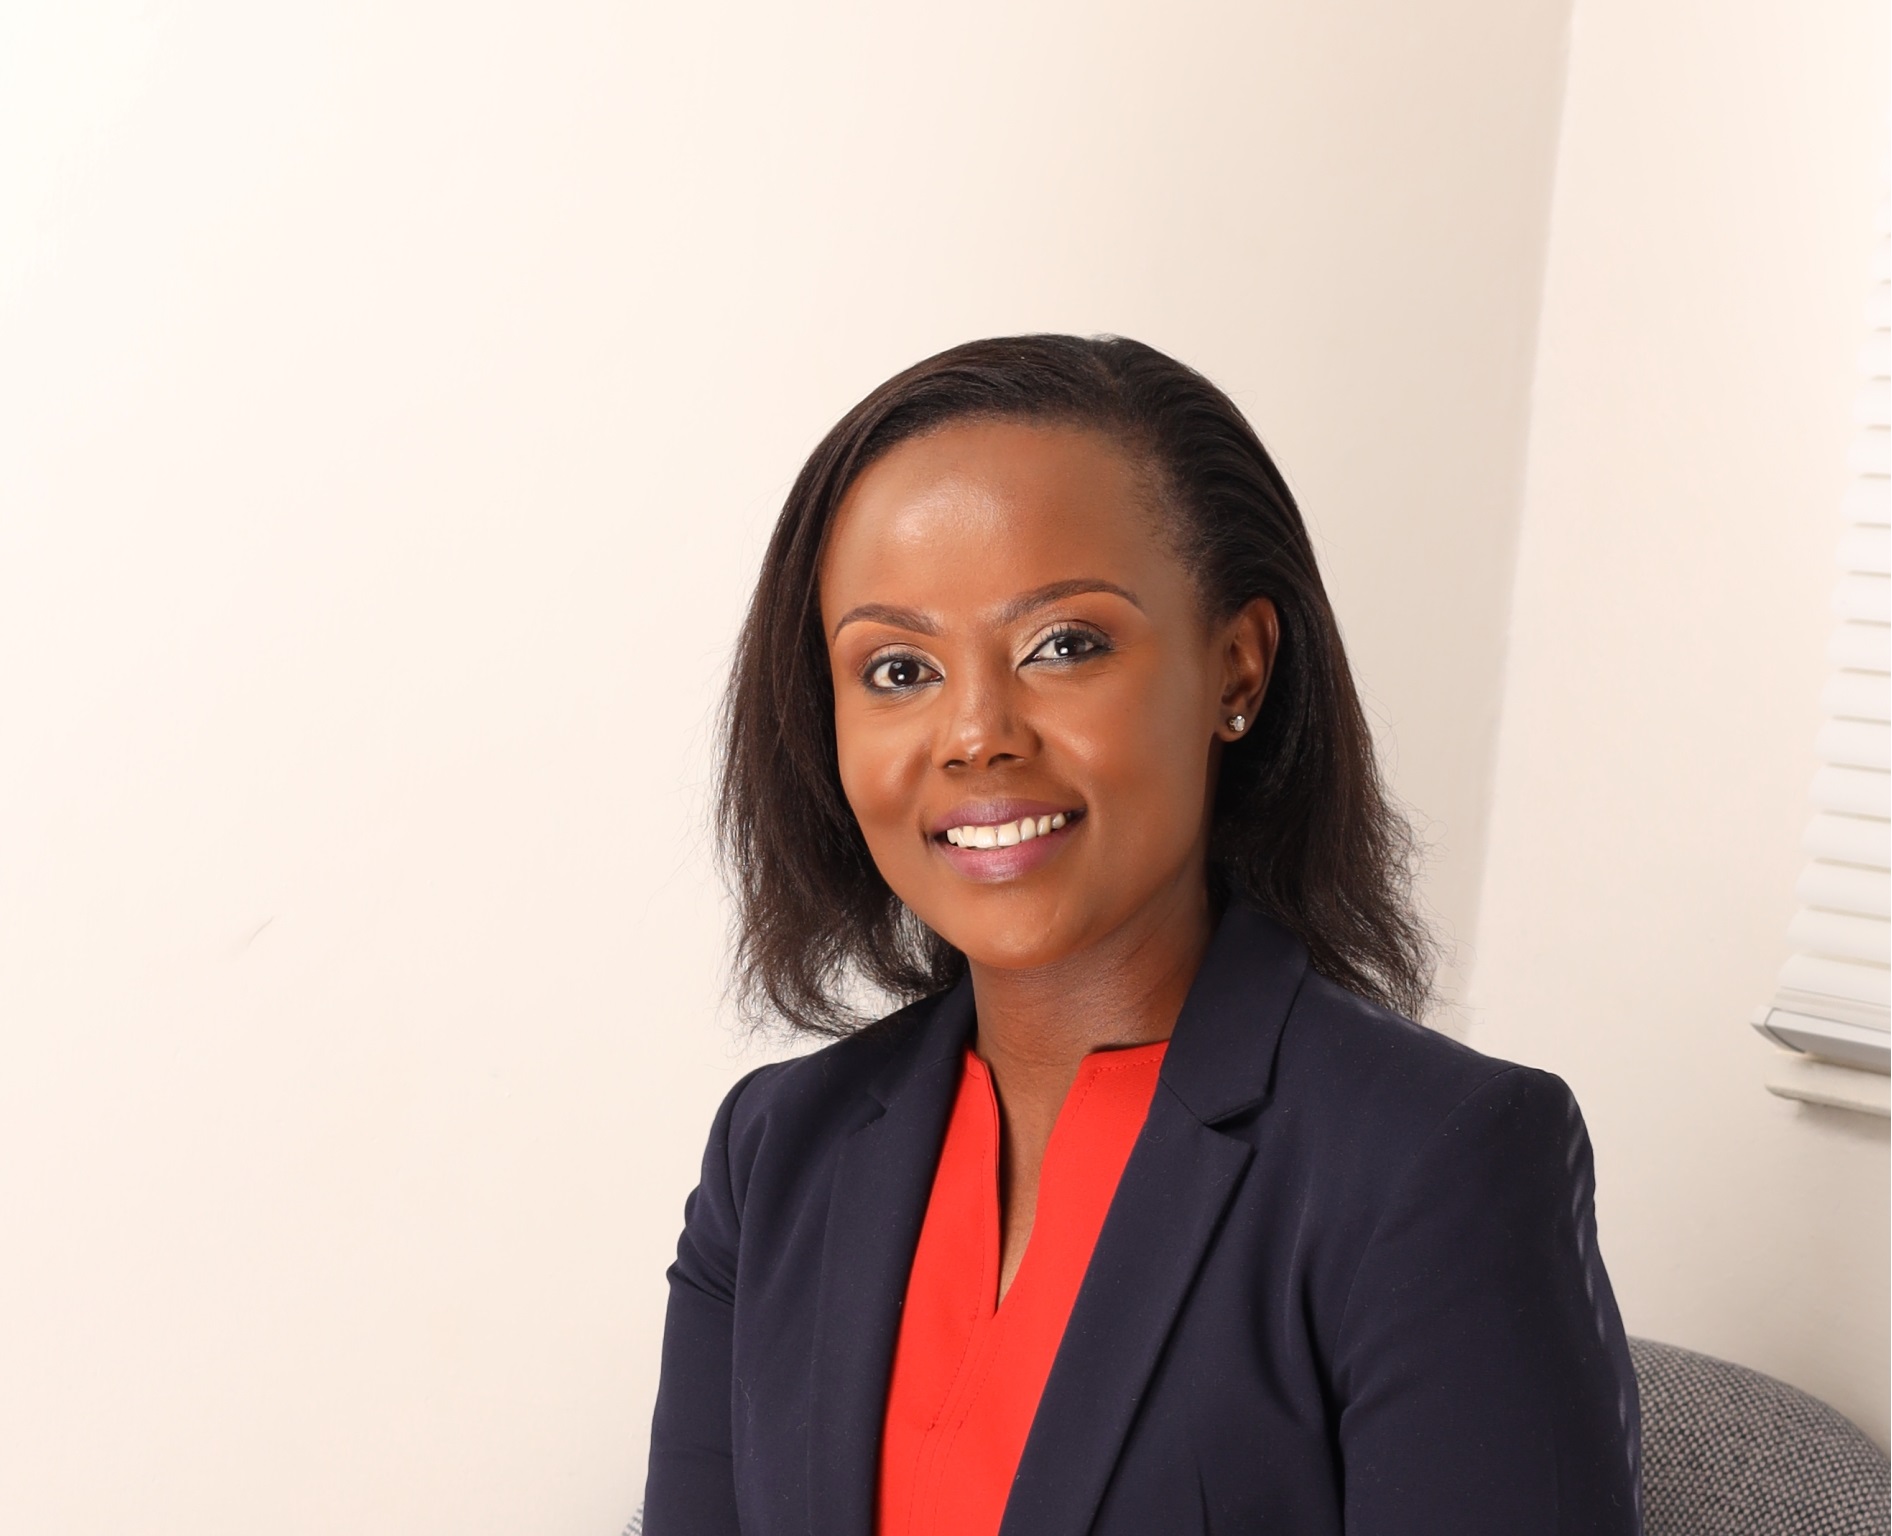 Catherine Muraga joins Microsoft as the new ADC MD